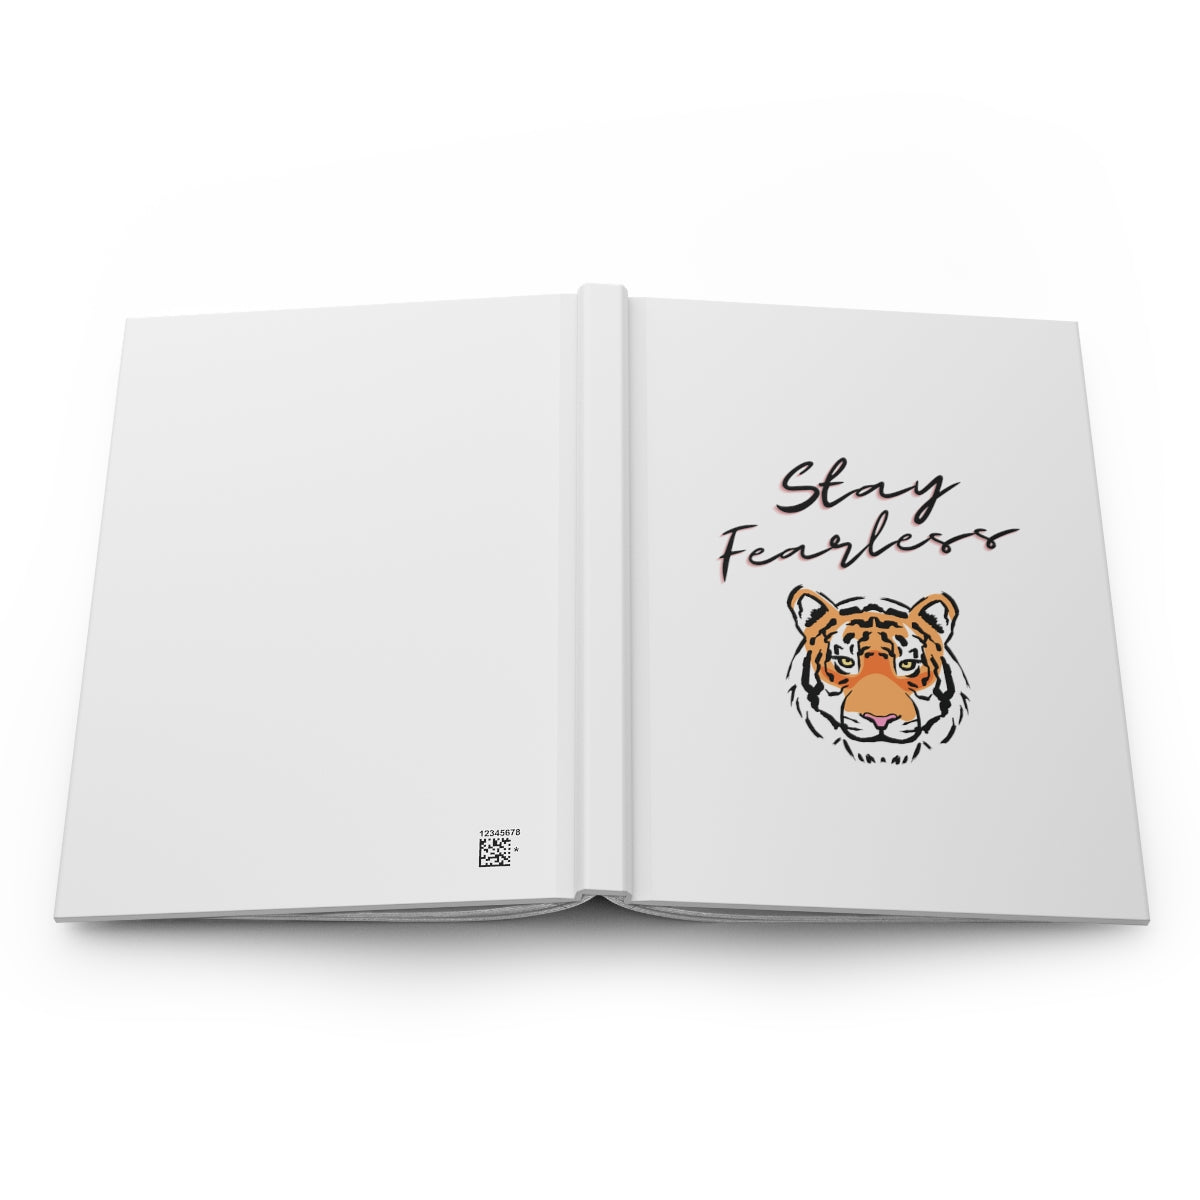 Hard cover notebook, Dotted Paper Journal, Stay Fearless Journal, Tiger, Lined Notebook, Lined Journal, Stationary, Empowerment Journal - The Good Life Vibe